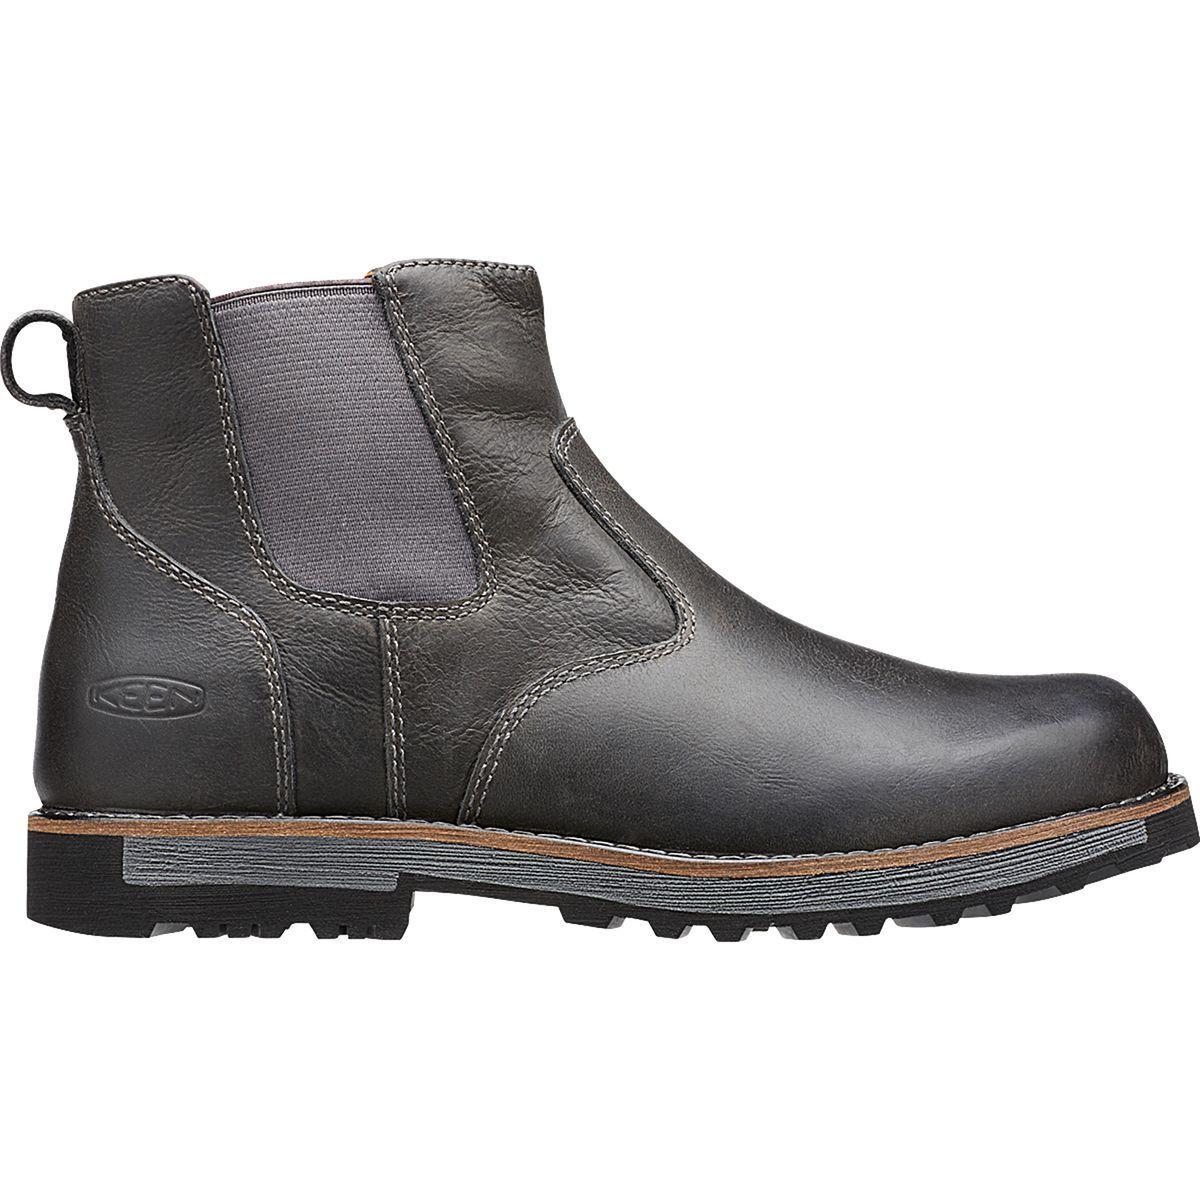 Keen Leather The 59 Chelsea Boot in Black for Men - Lyst